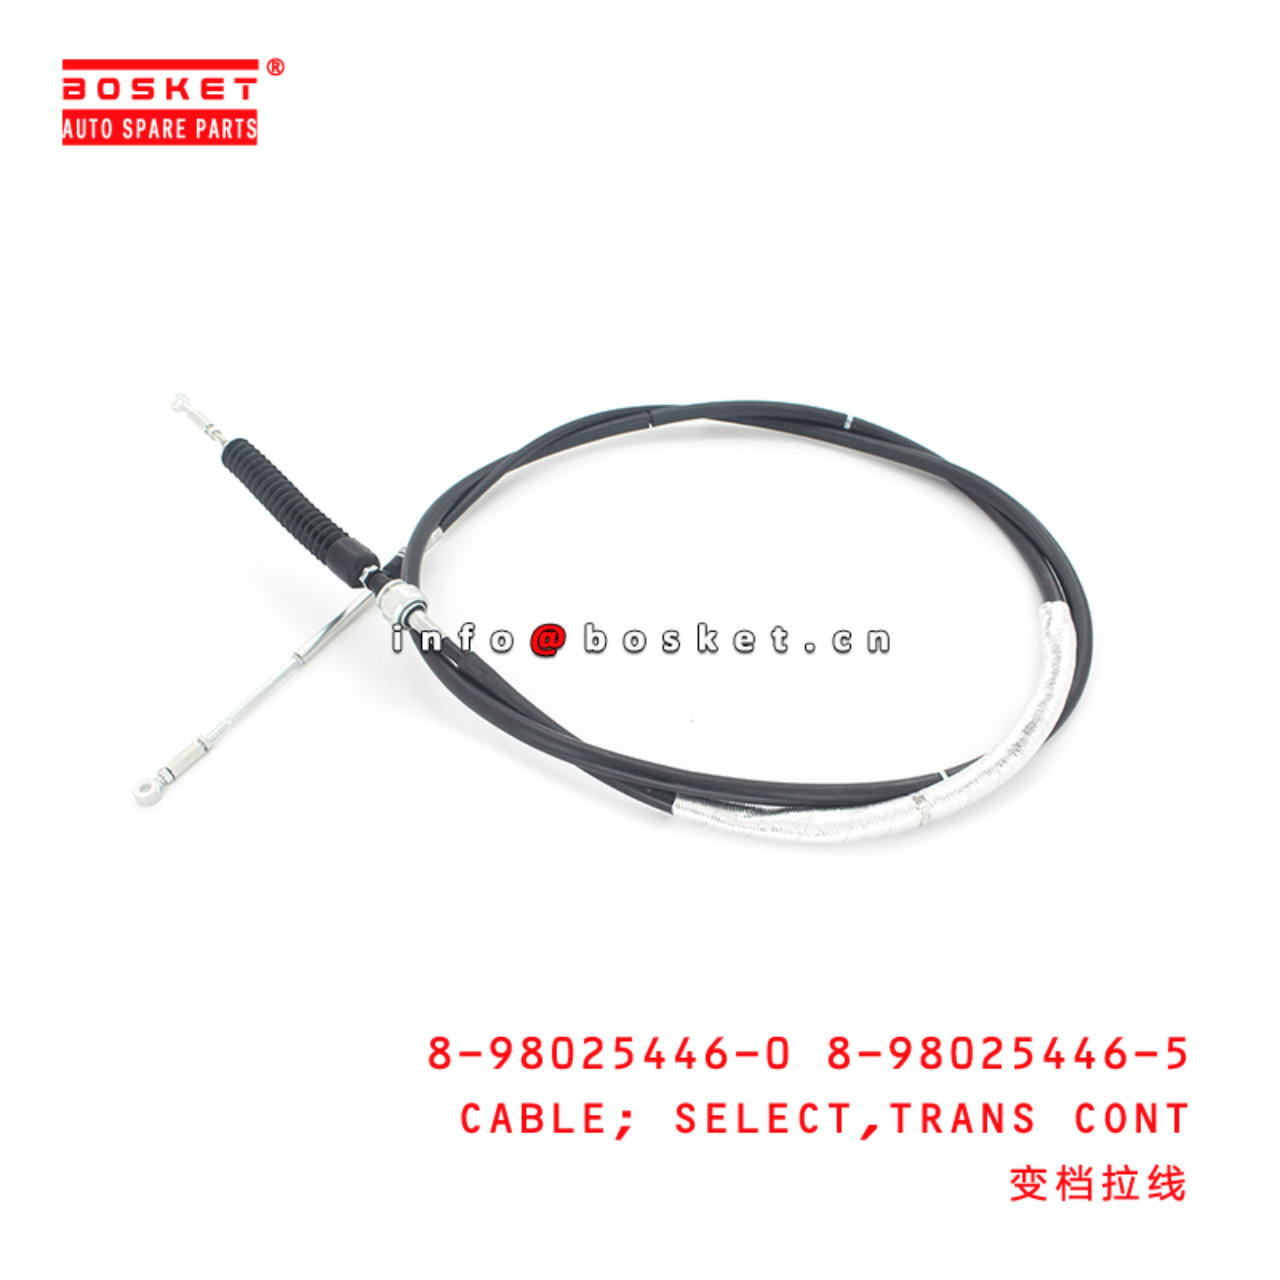 8-98025446-0 8-98025446-5 Transmission Control Select Cable 8980254460 8980254465 Suitable for ISUZU